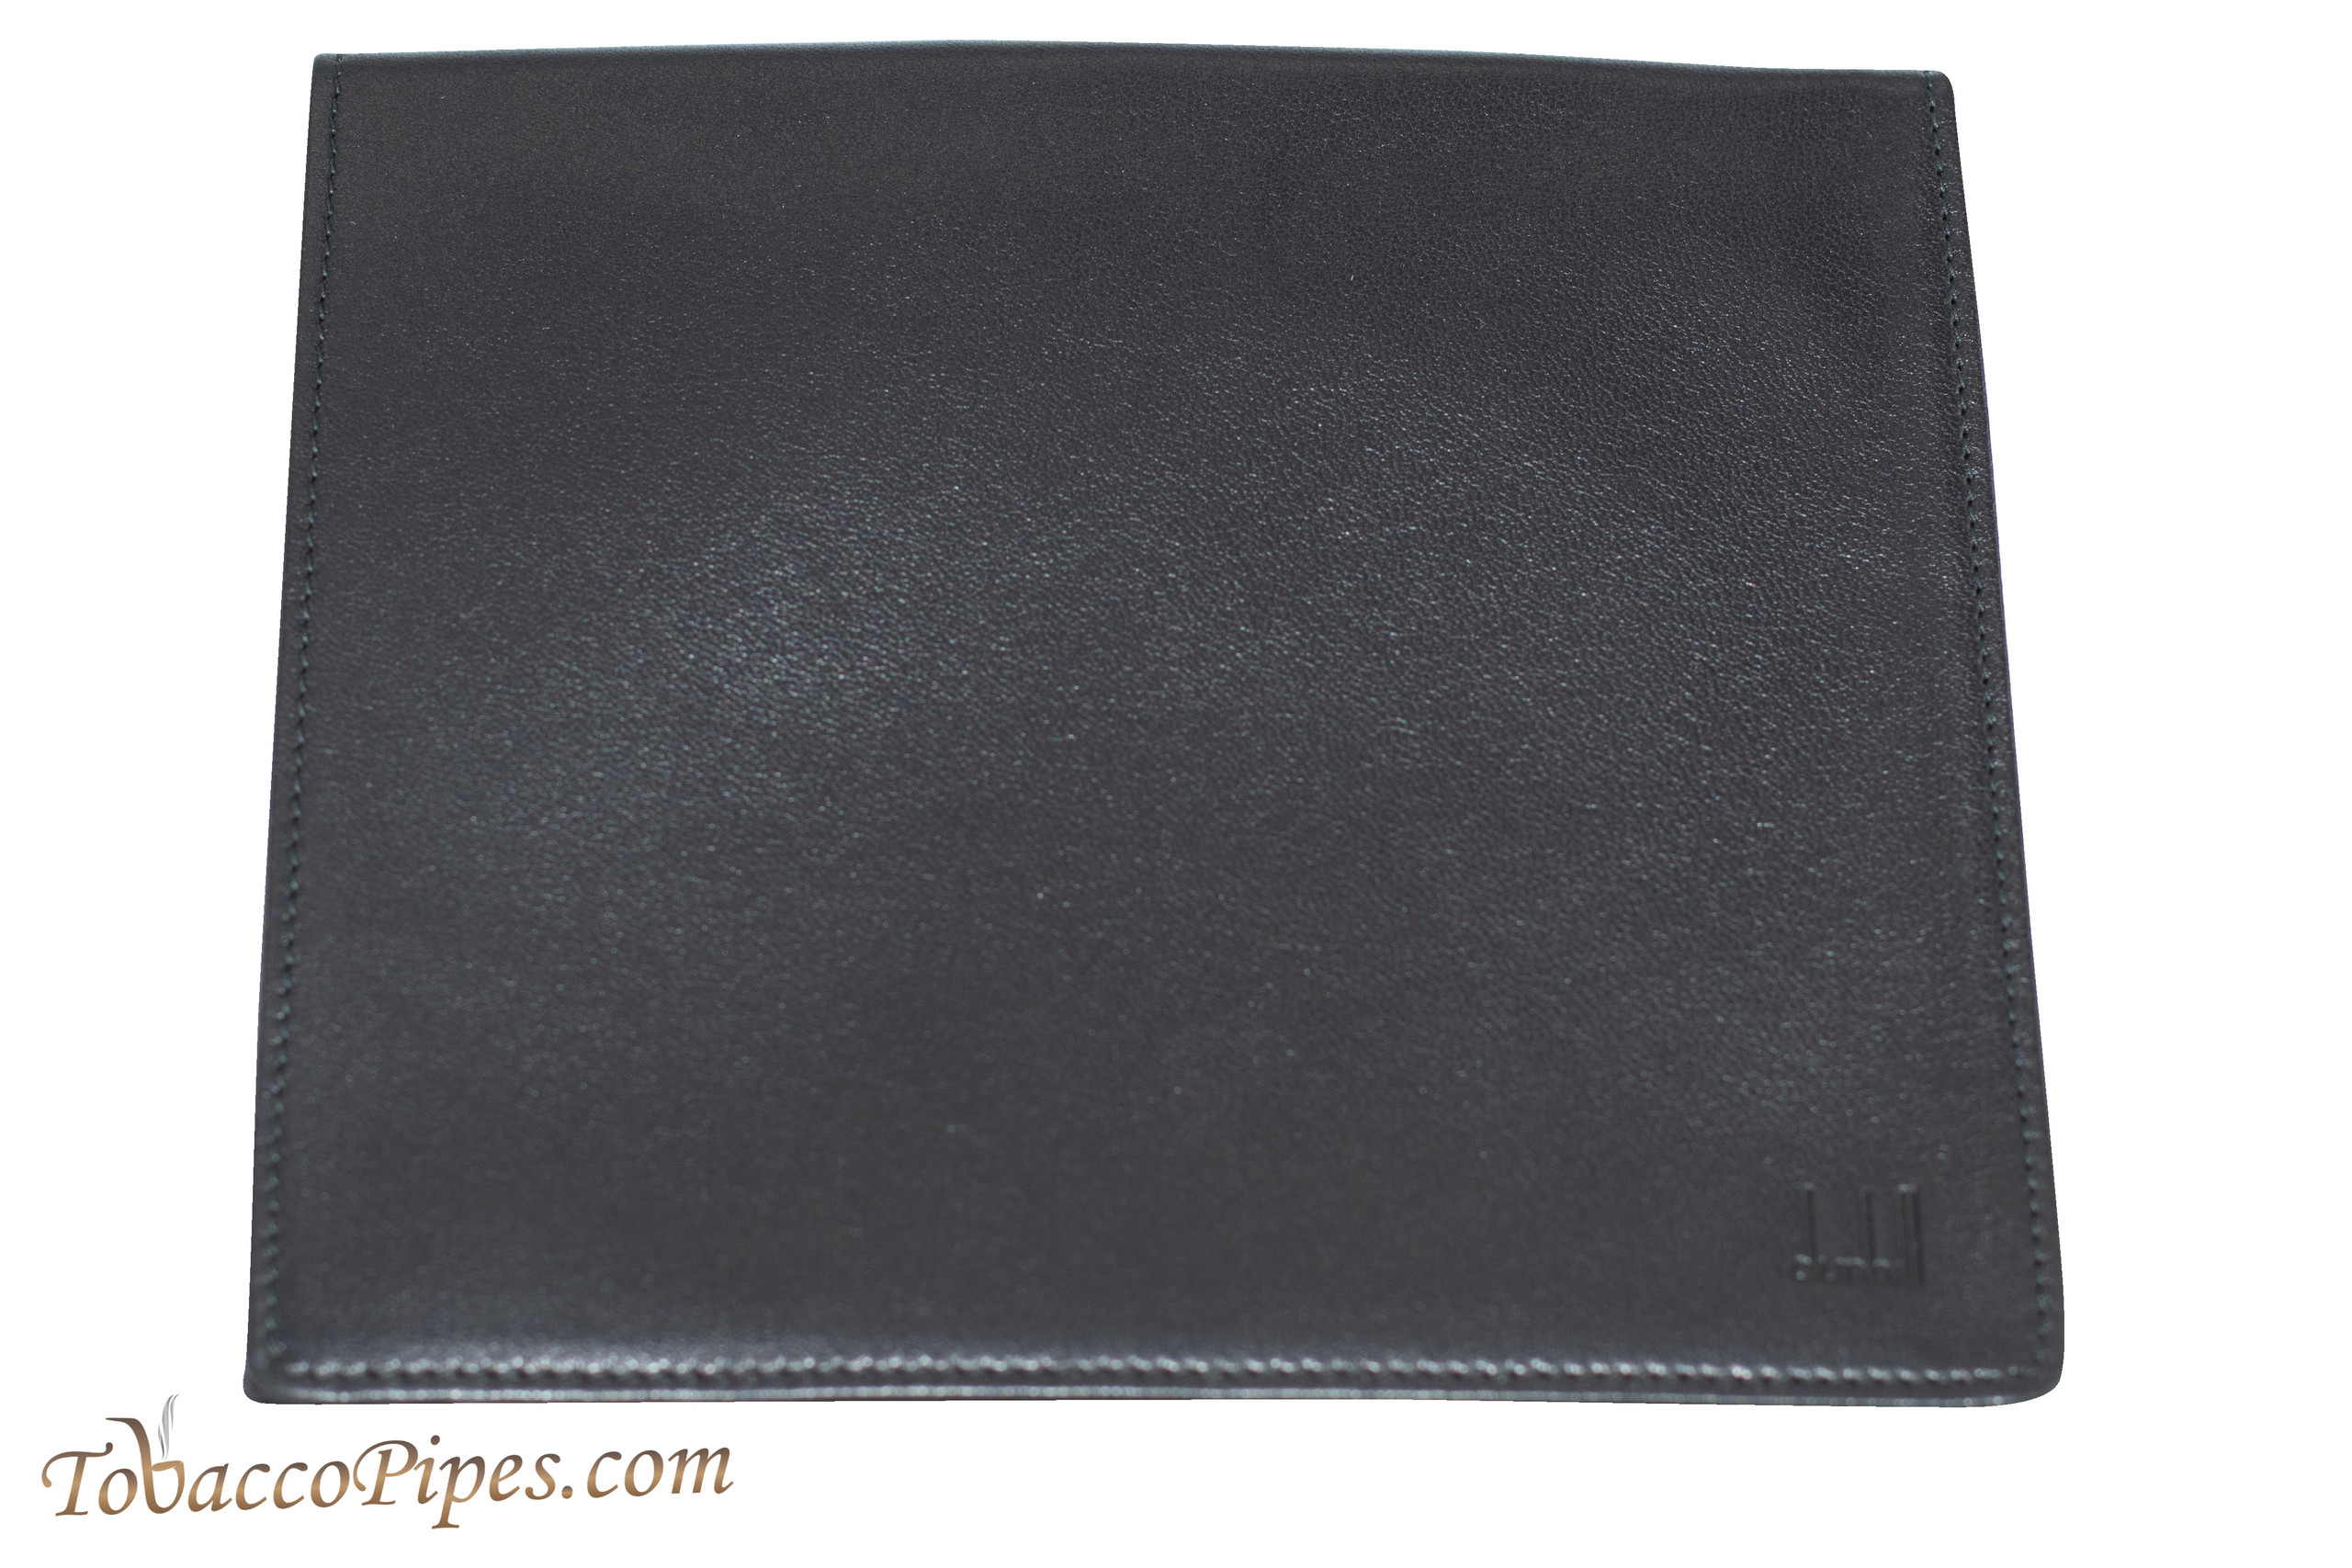 White Spot Classic Roll up Tobacco Pouch - TobaccoPipes.com